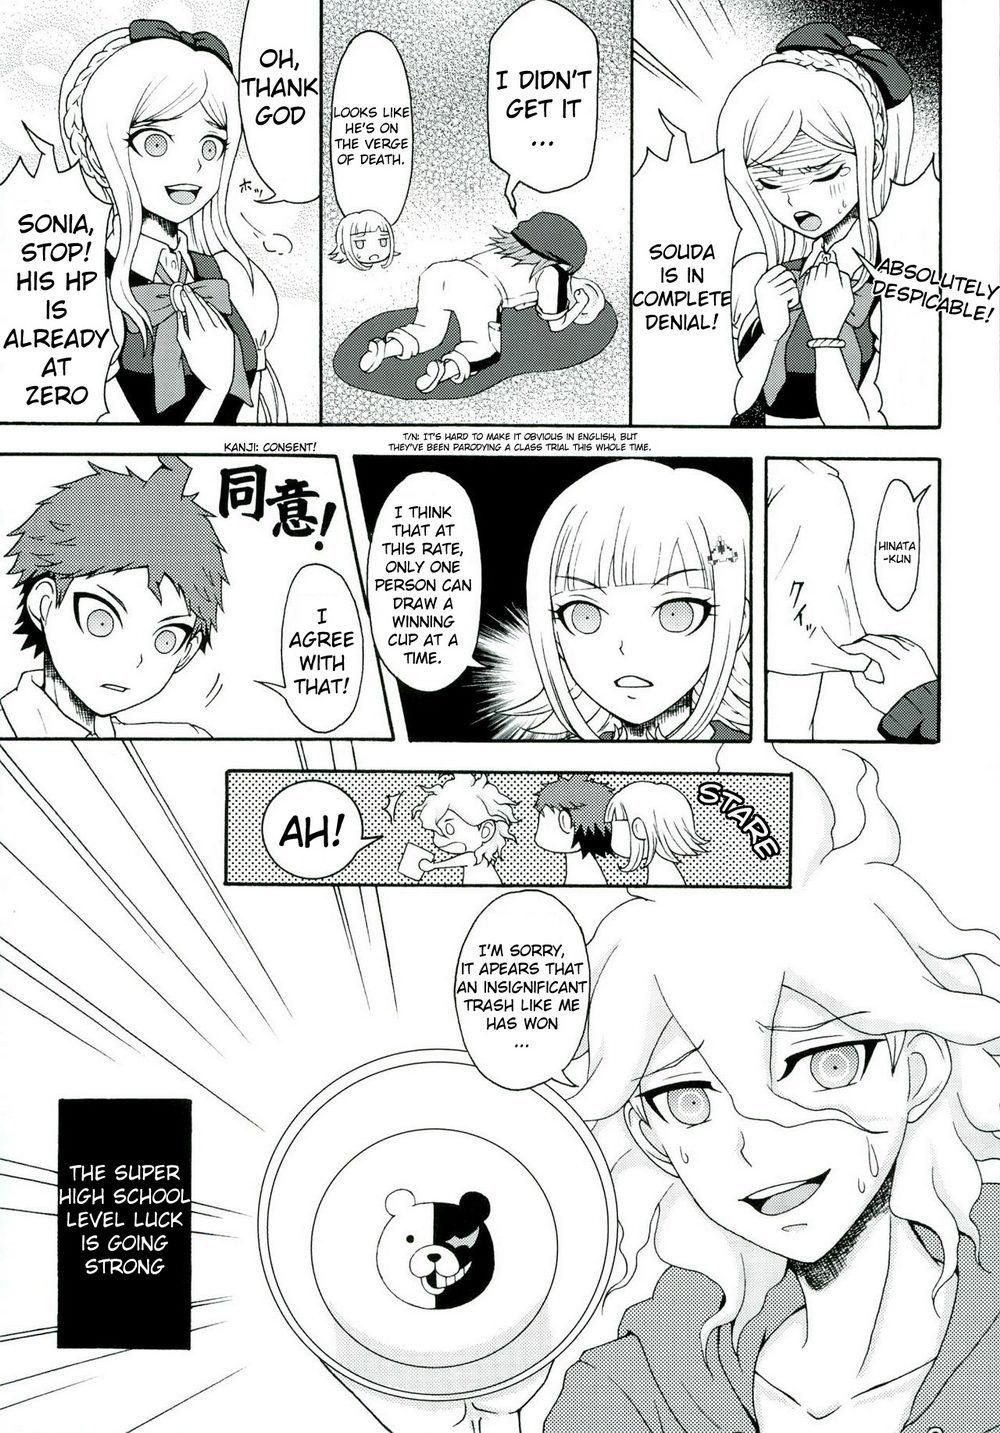 Hot Girls Getting Fucked INSTANT LOVERS - Danganronpa Ejaculation - Page 11